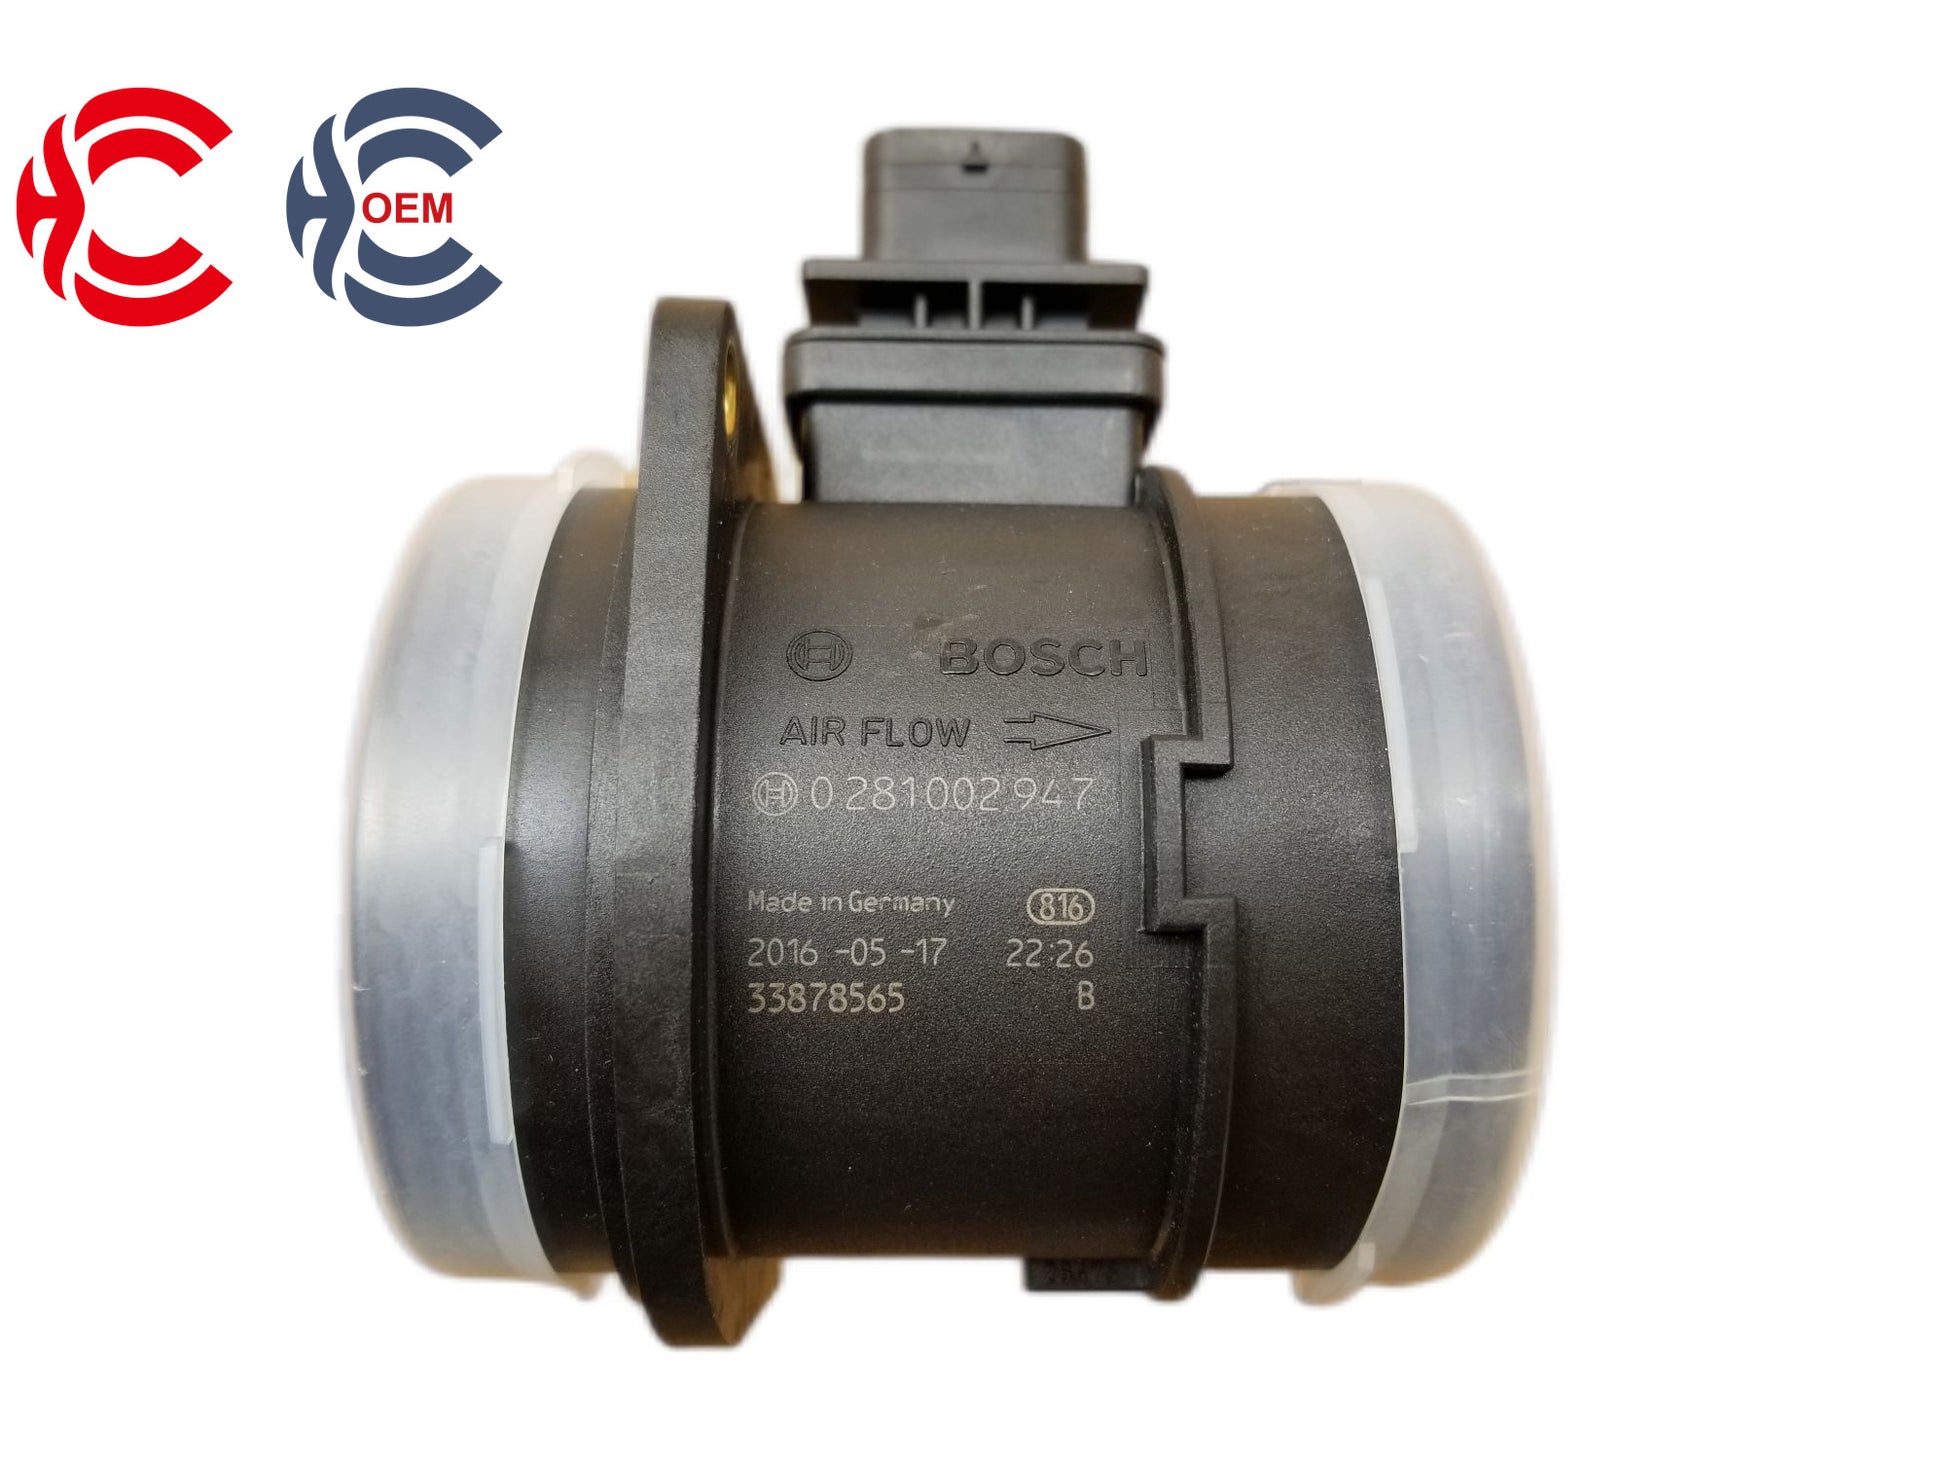 OEM: 0281002947Material: ABSColor: BlackOrigin: Made in ChinaWeight: 200gPacking List: 1* Air Flow Sensor Sensor More ServiceWe can provide OEM Manufacturing serviceWe can Be your one-step solution for Auto PartsWe can provide technical scheme for you Feel Free to Contact Us, We will get back to you as soon as possible.